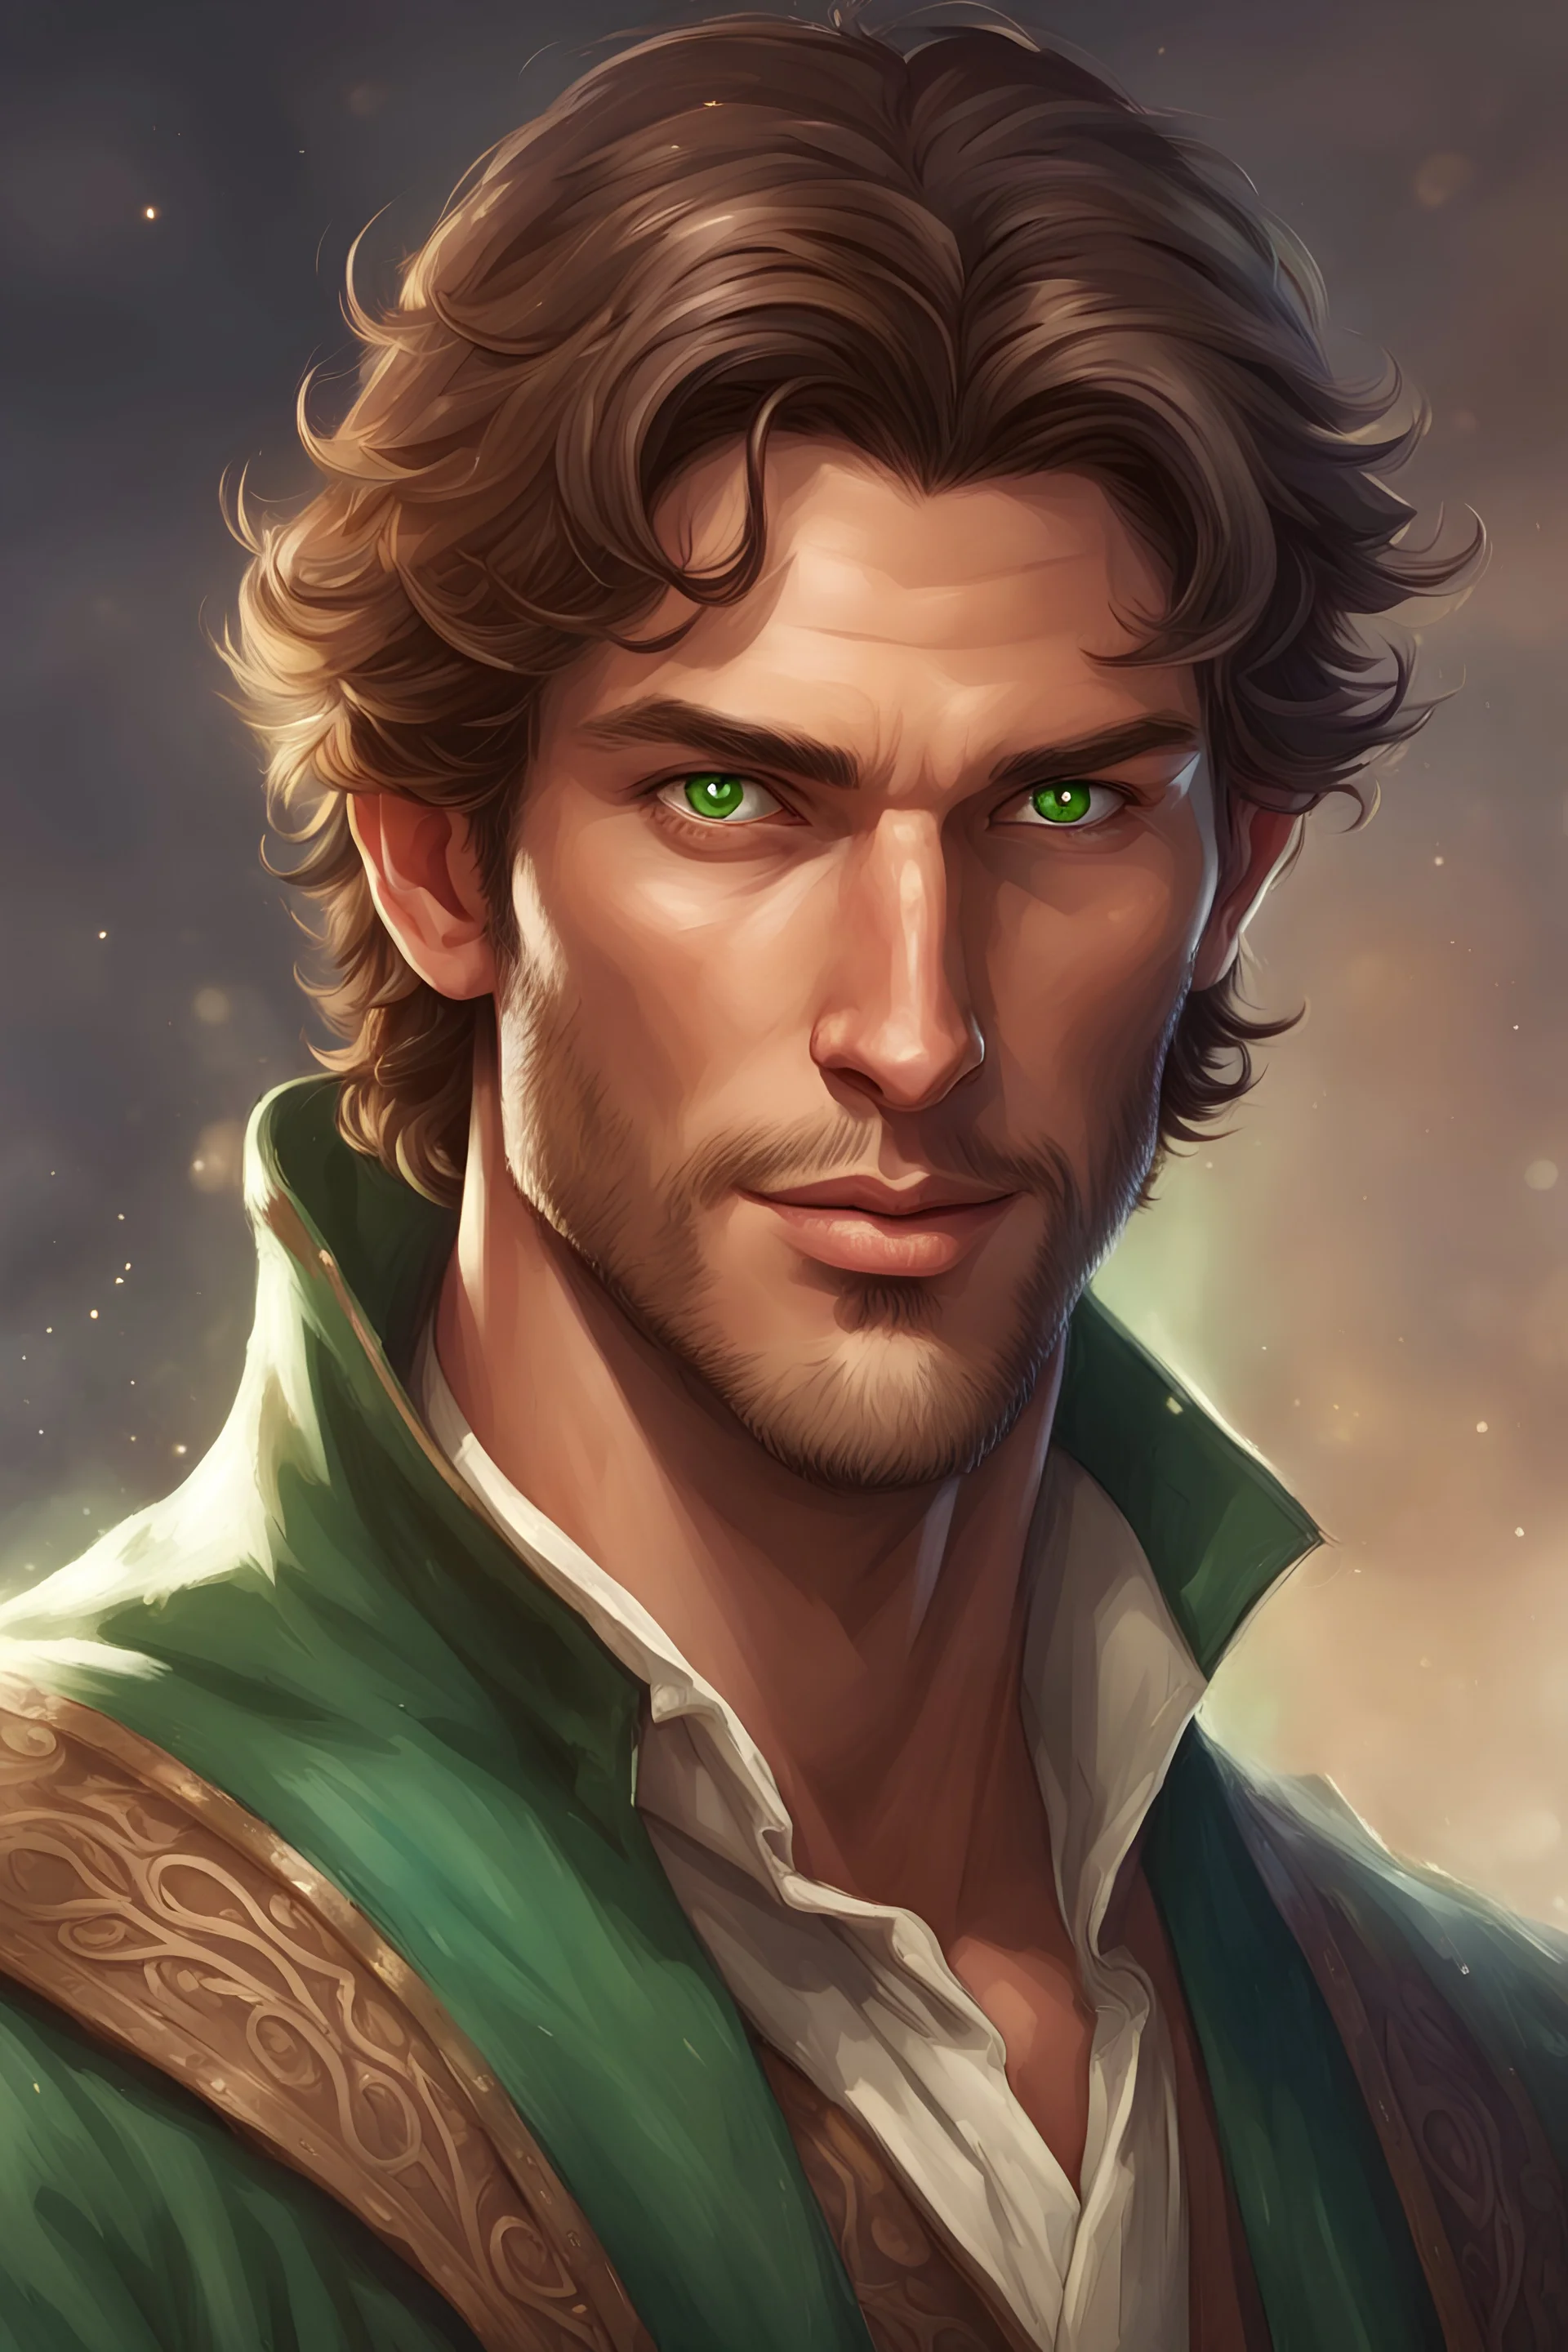 handsome thirty-year-old sorcerer, with tanned skin, brown hair and green eyes, with a kind face